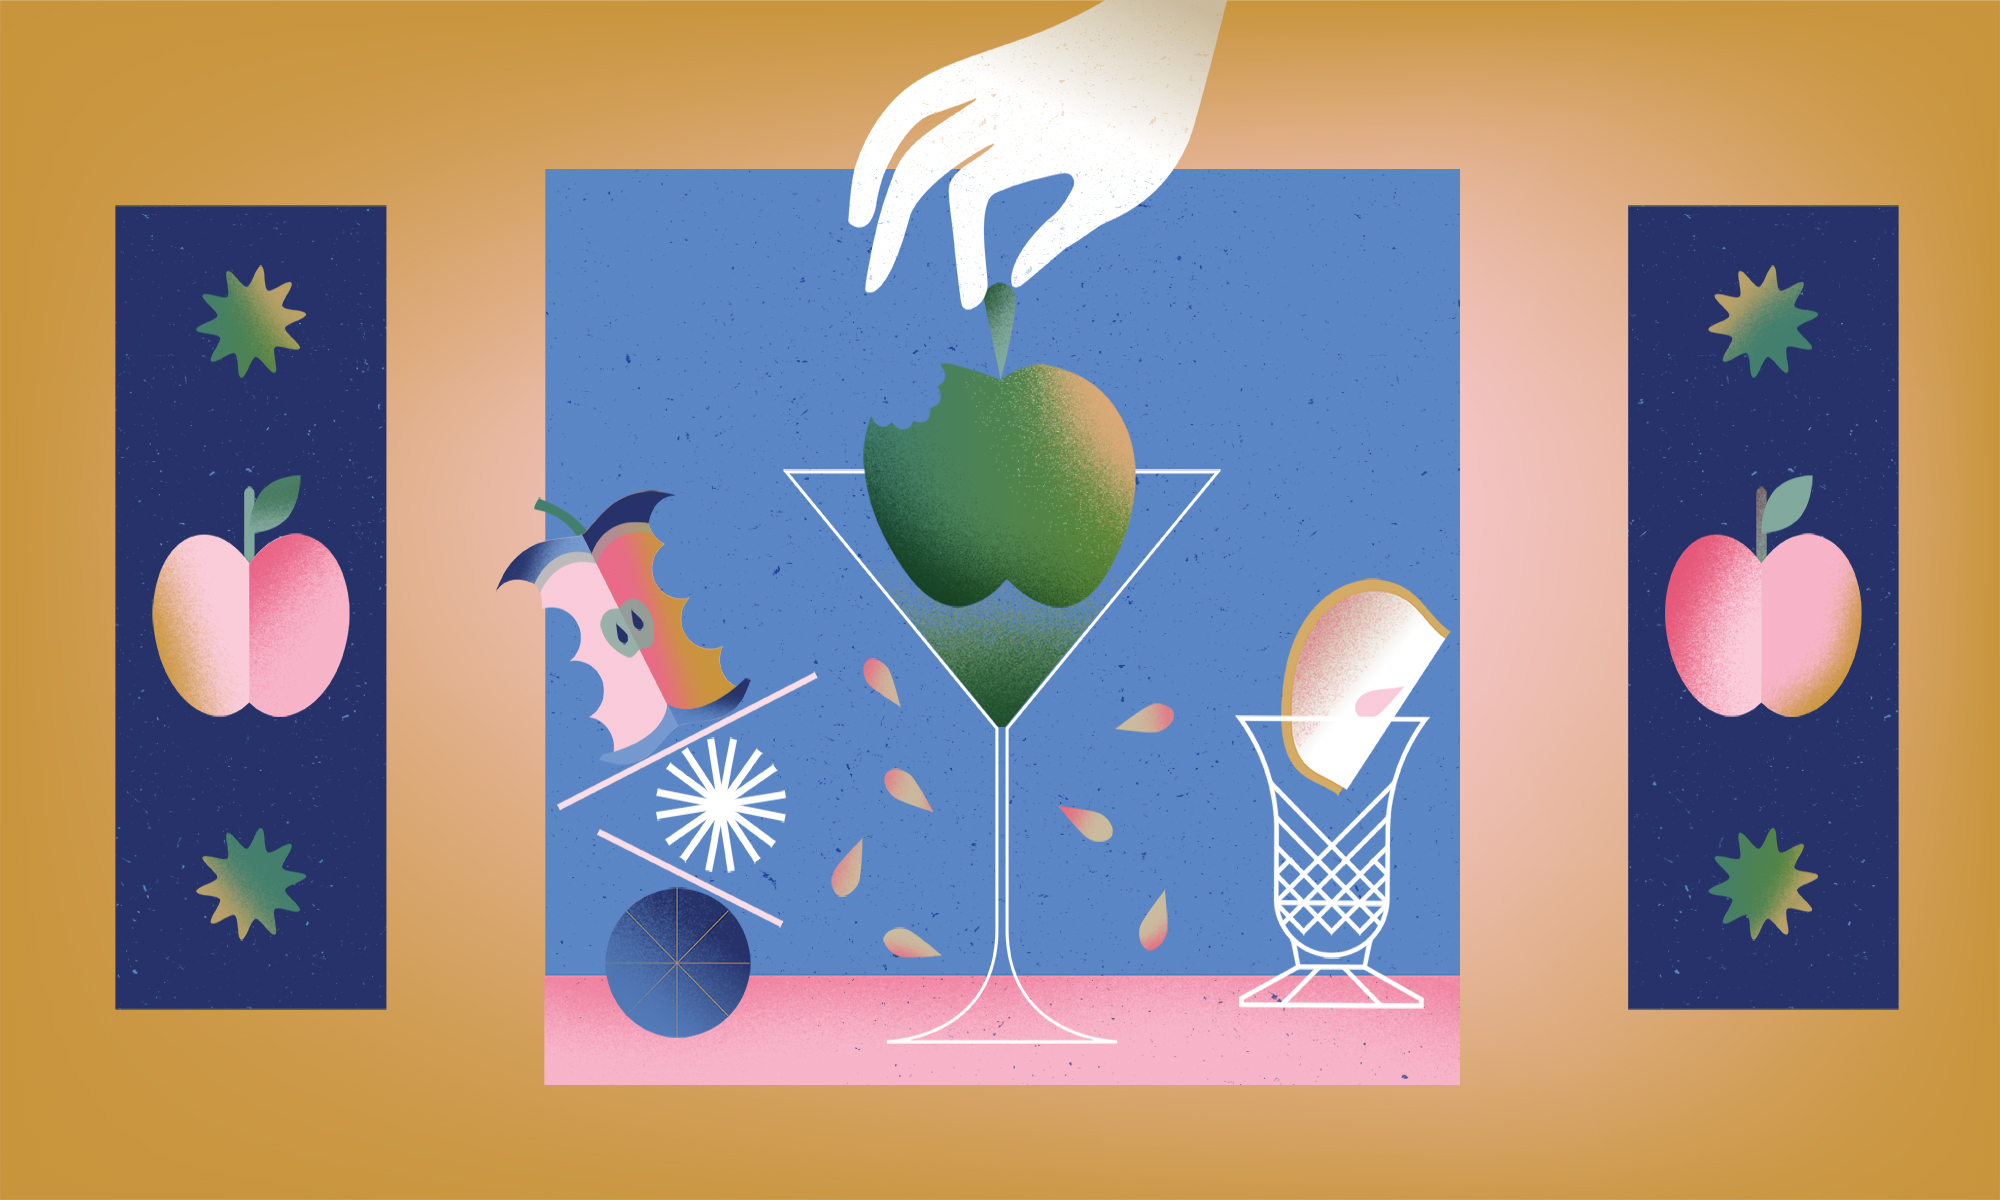 A hand lowers an apple into a martini glass. It’s surrounded by an apple core balancing on the left and a wedge of cut apple in a glass on the right.